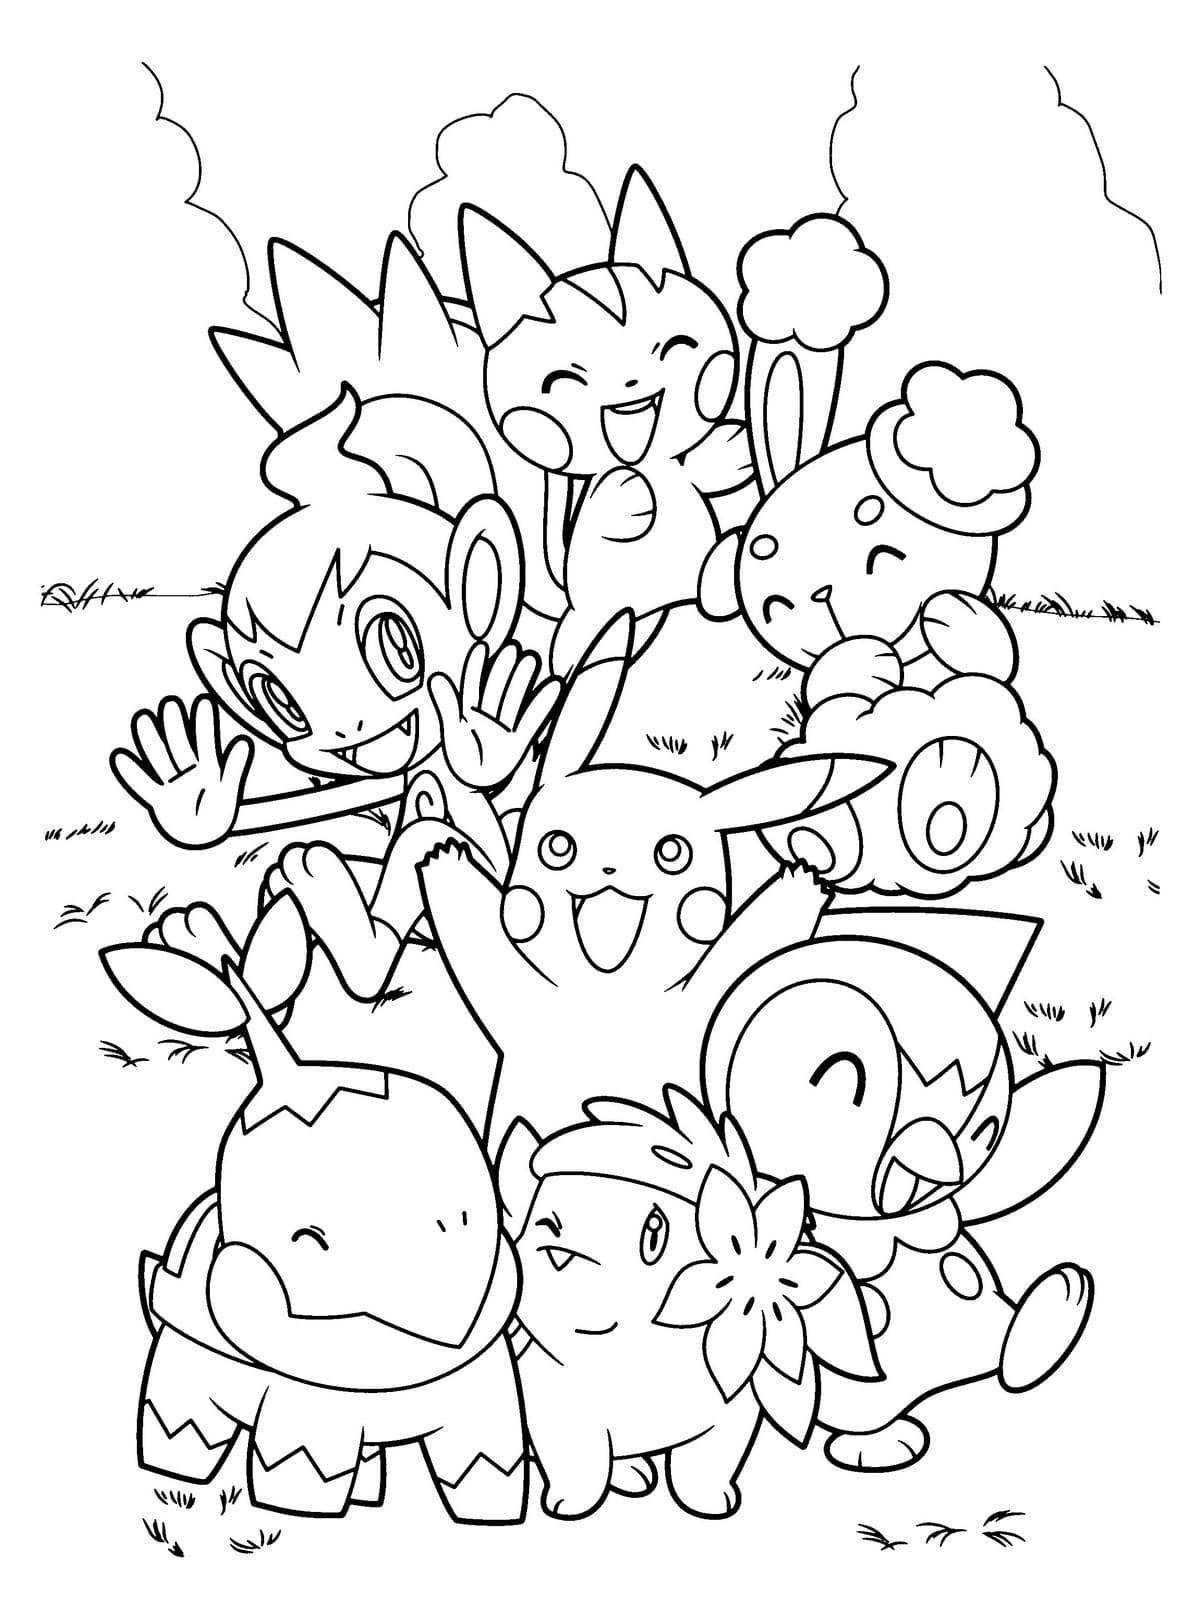 Coloring book cheerful chimchar